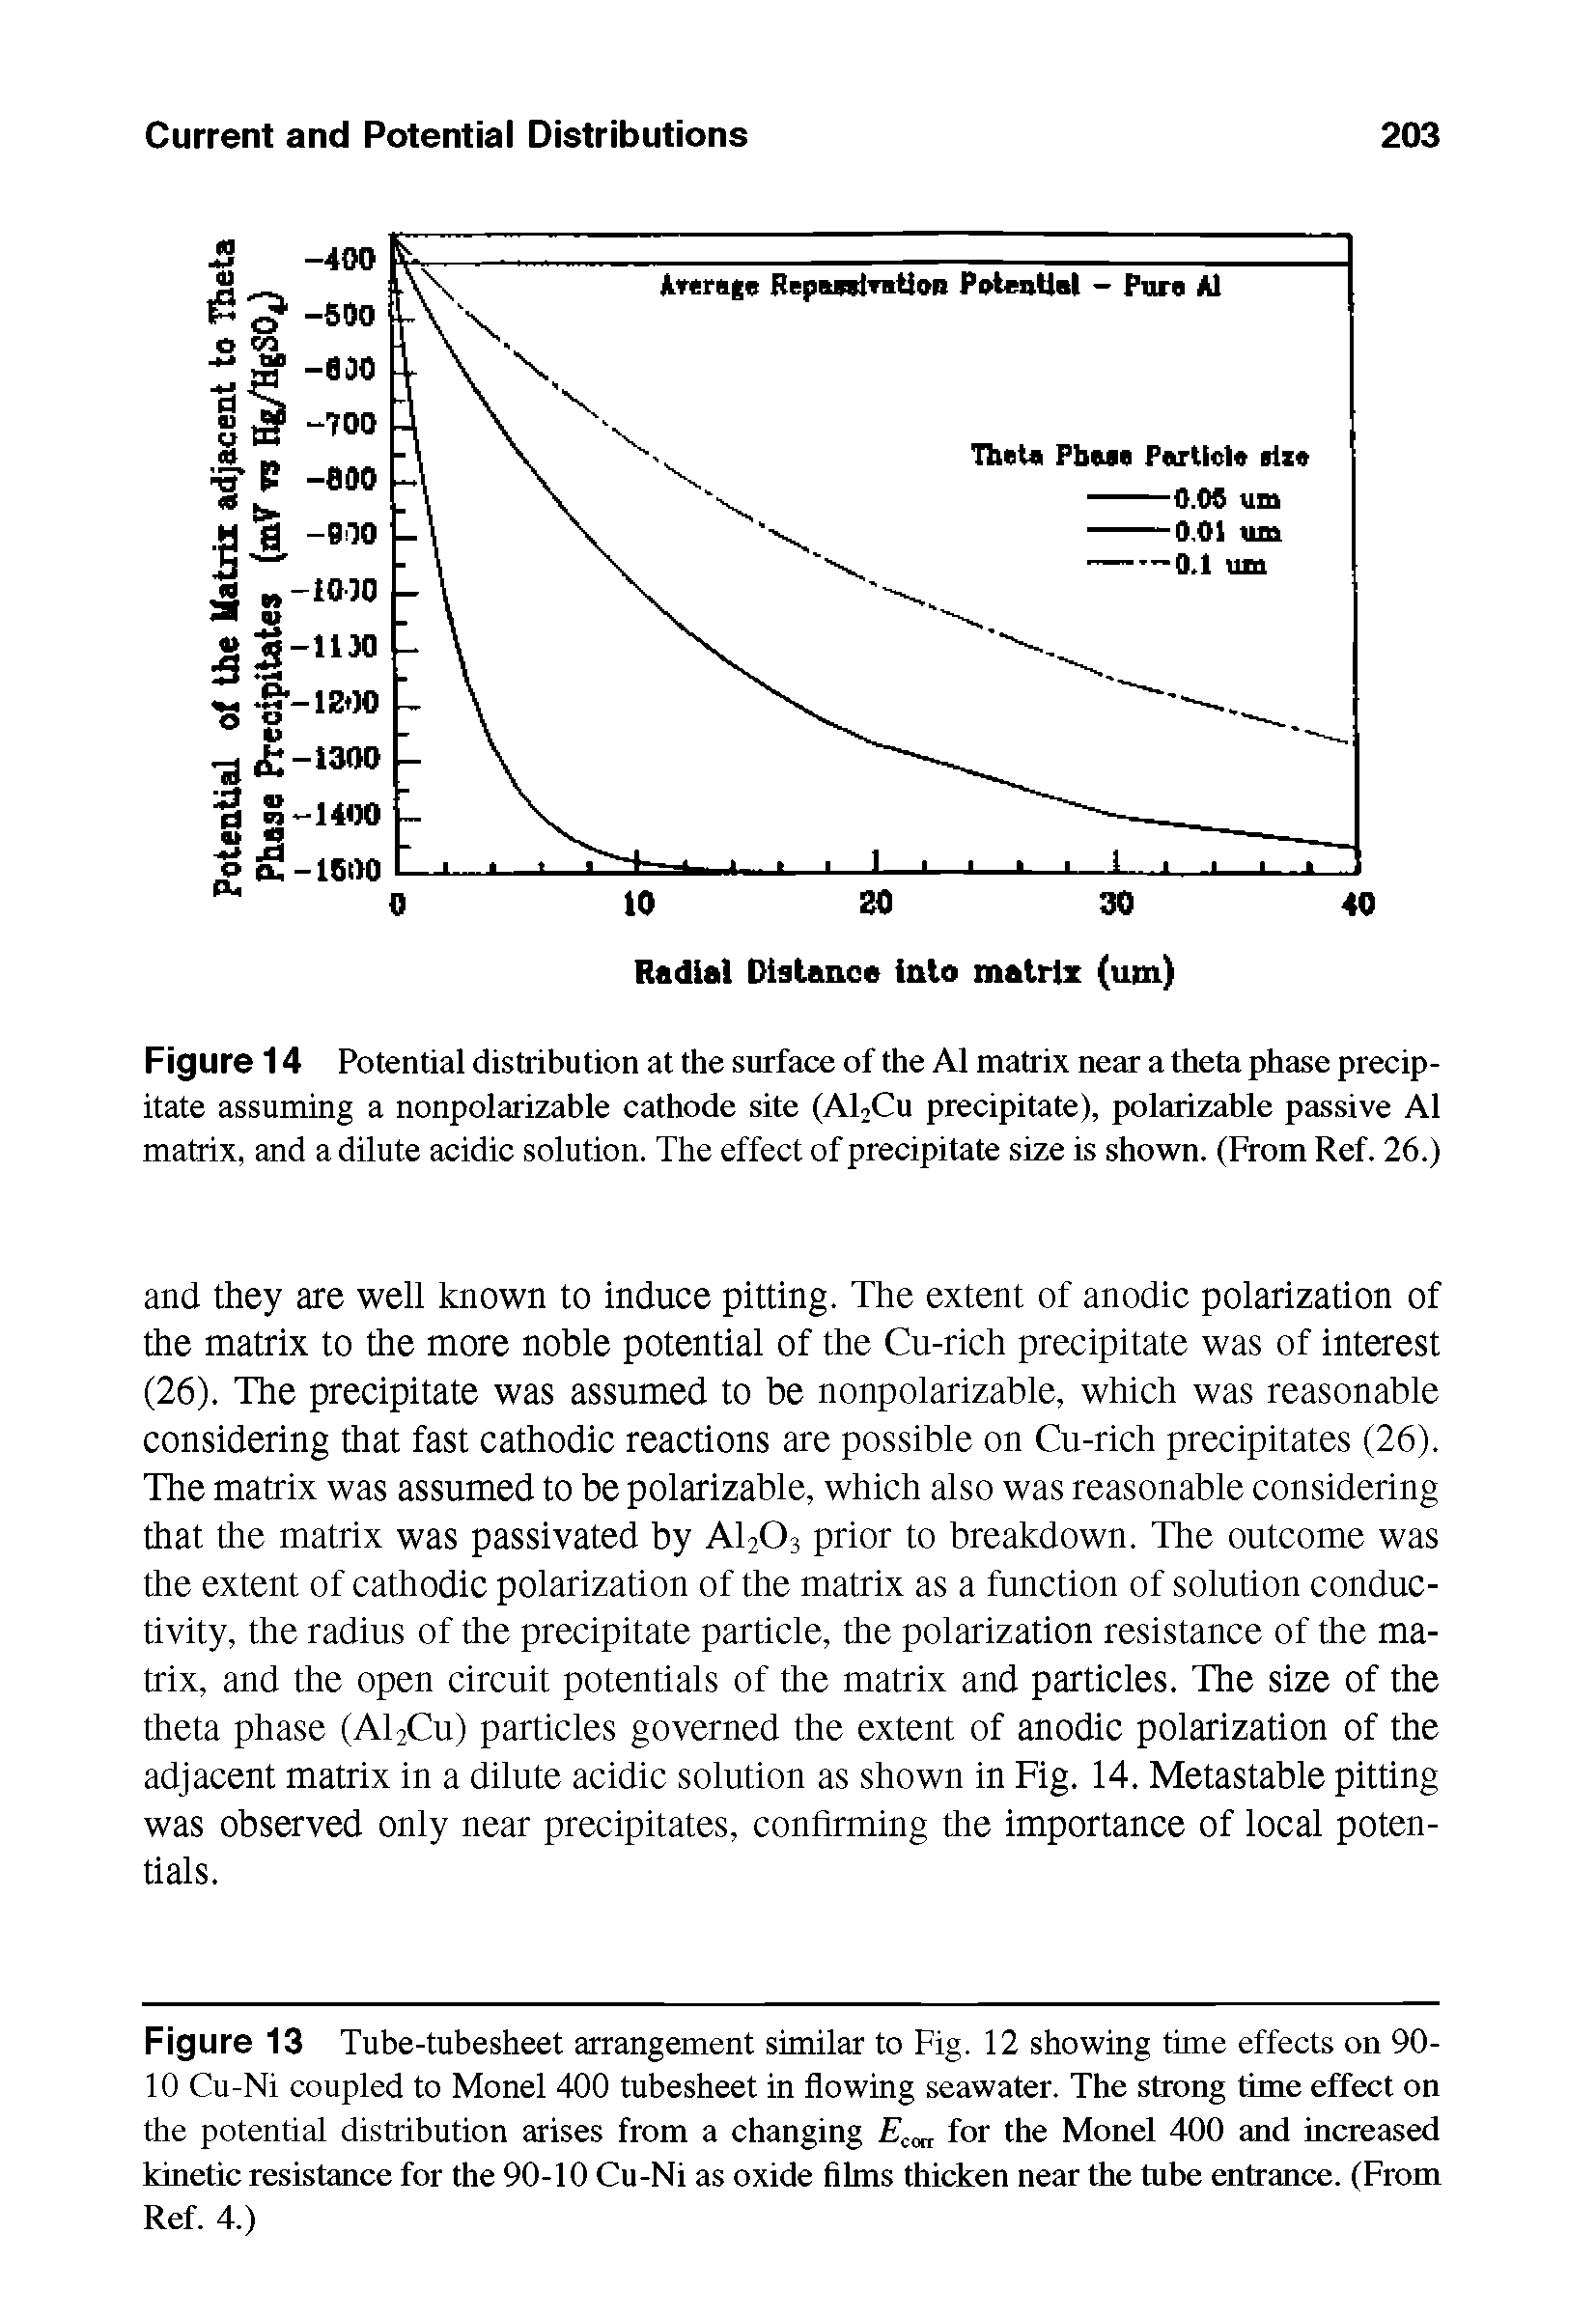 Figure 14 Potential distribution at the surface of the A1 matrix near a theta phase precipitate assuming a nonpolarizable cathode site (Al2Cu precipitate), polarizable passive A1 matrix, and a dilute acidic solution. The effect of precipitate size is shown. (From Ref. 26.)...